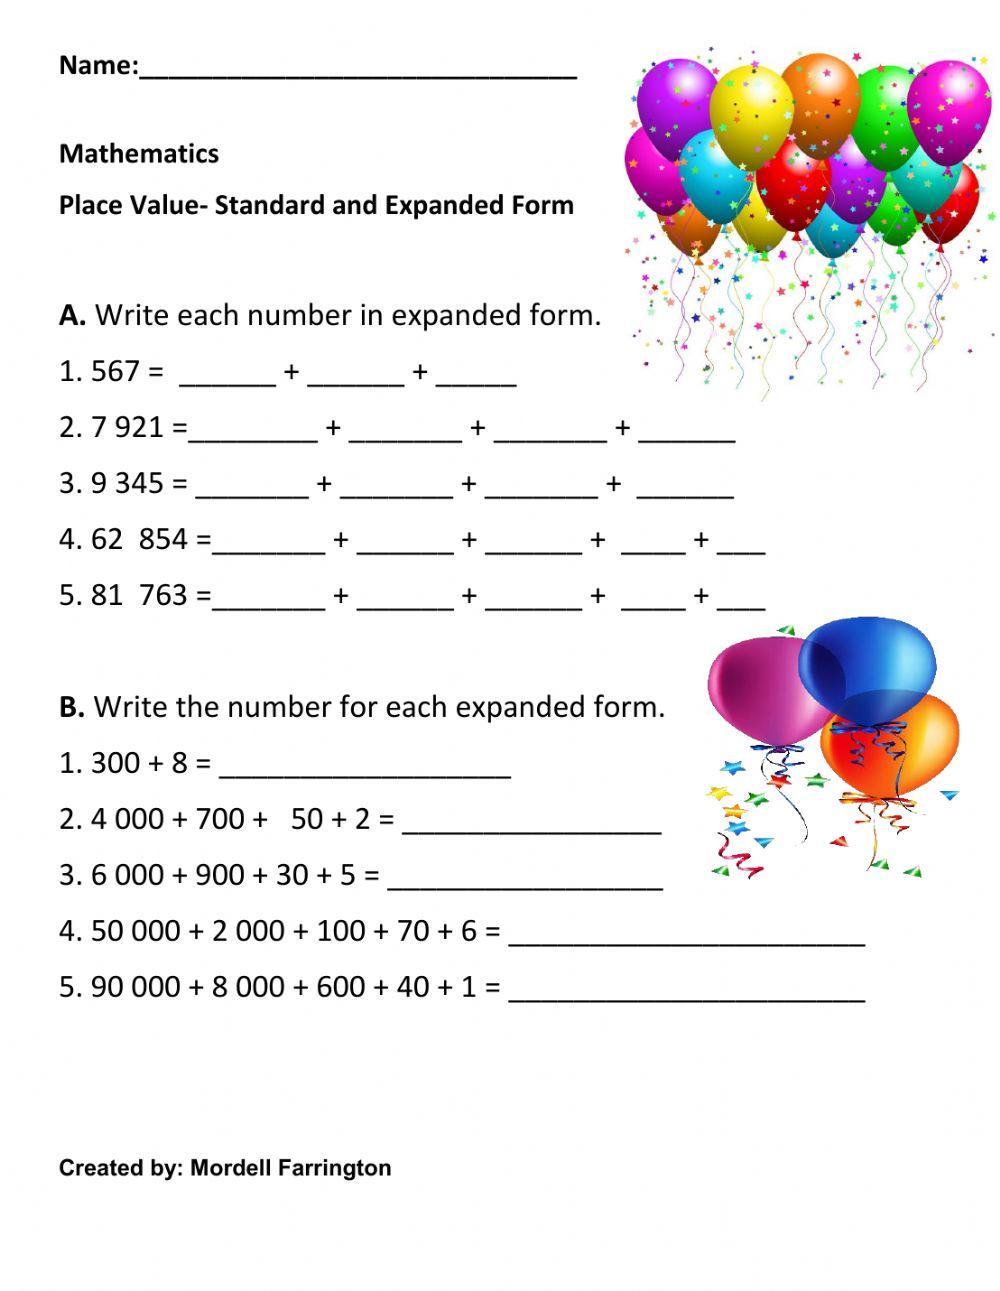 Place Value - Expanded and Standard Form